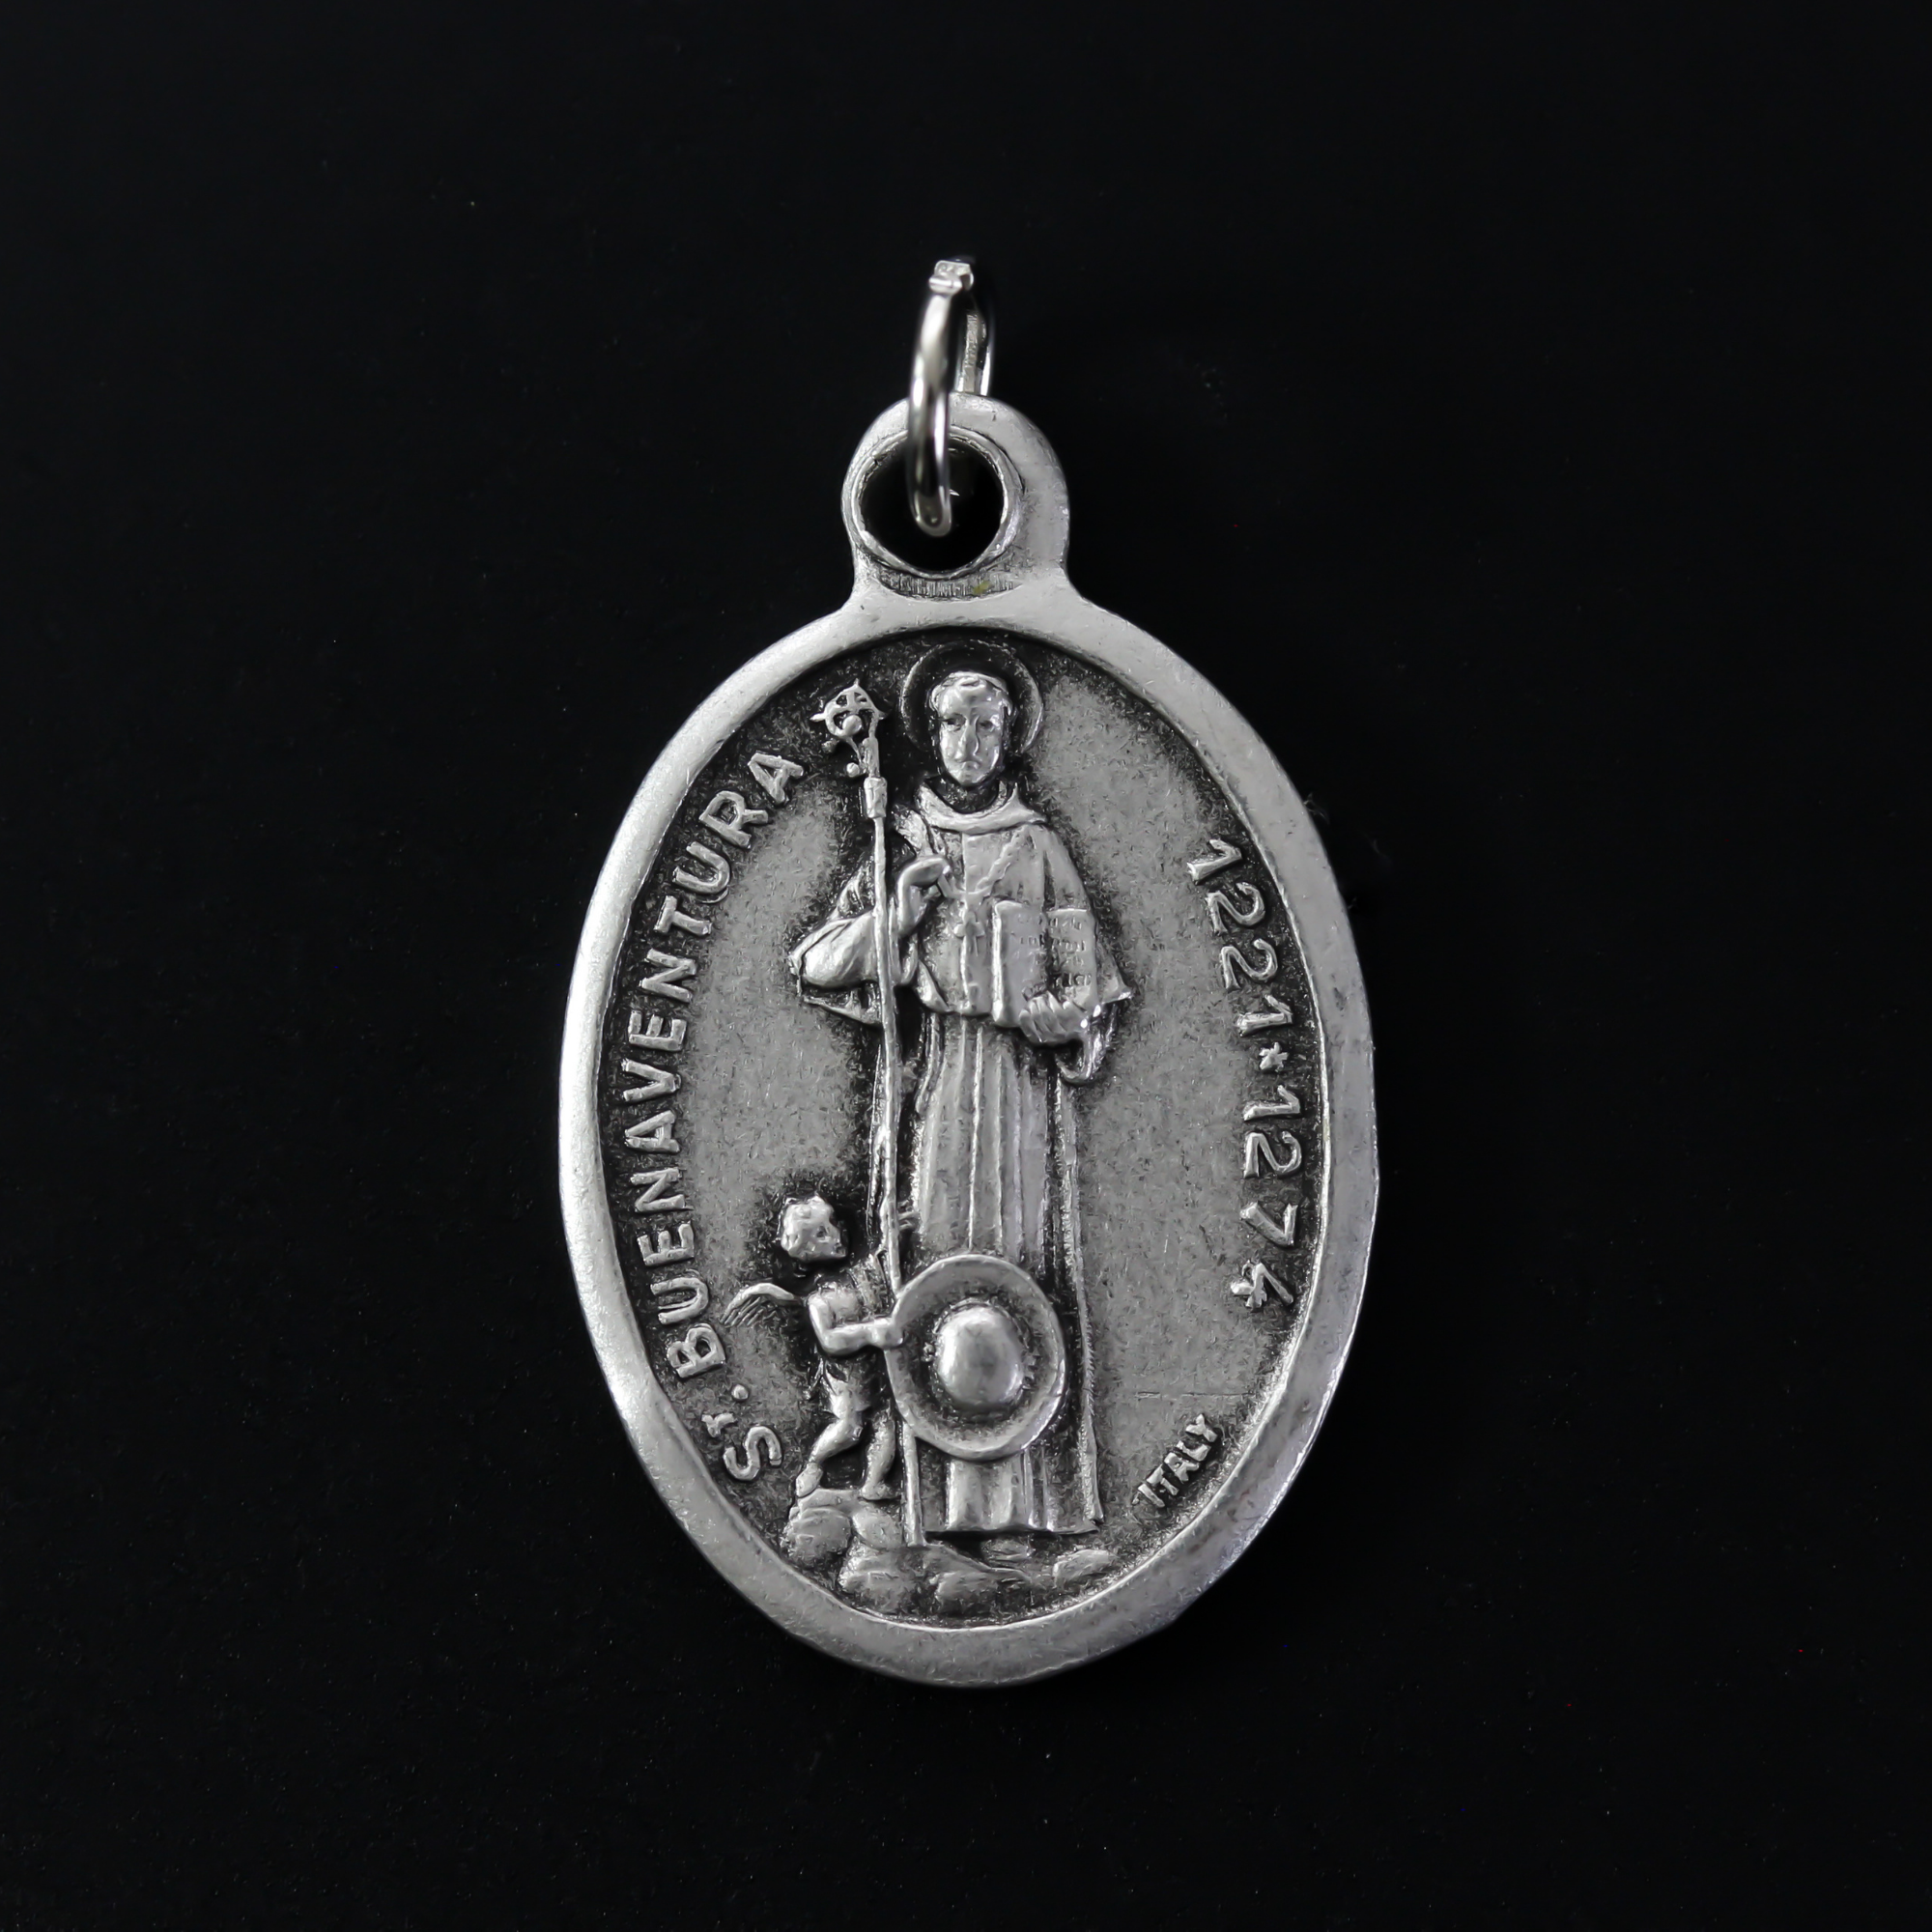 Saint Bonaventure Spanish medal. The front depicts the saint and the reverse depicts Mission San Buenaventura which was founded in 1782